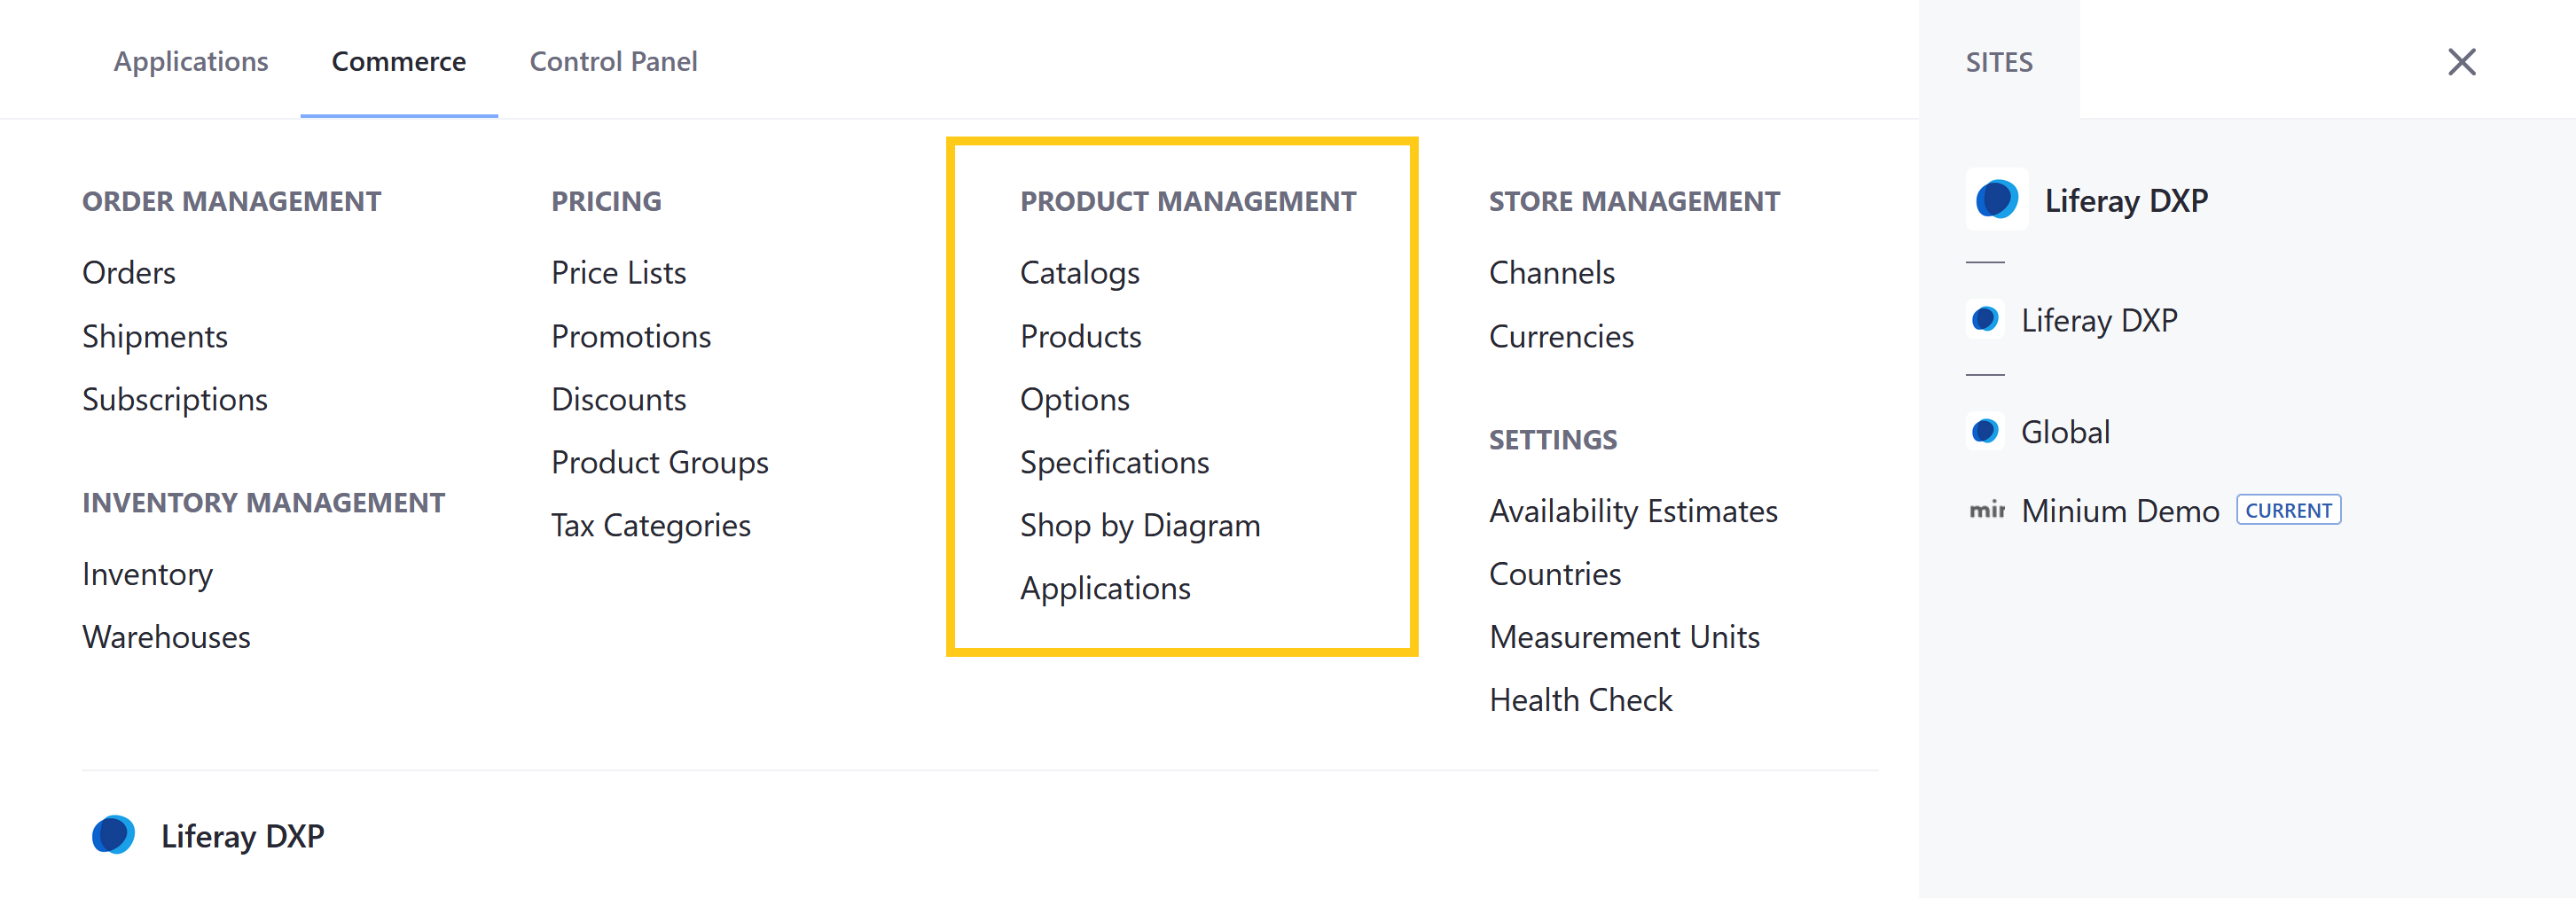 Control access to Product Management applications and resources.